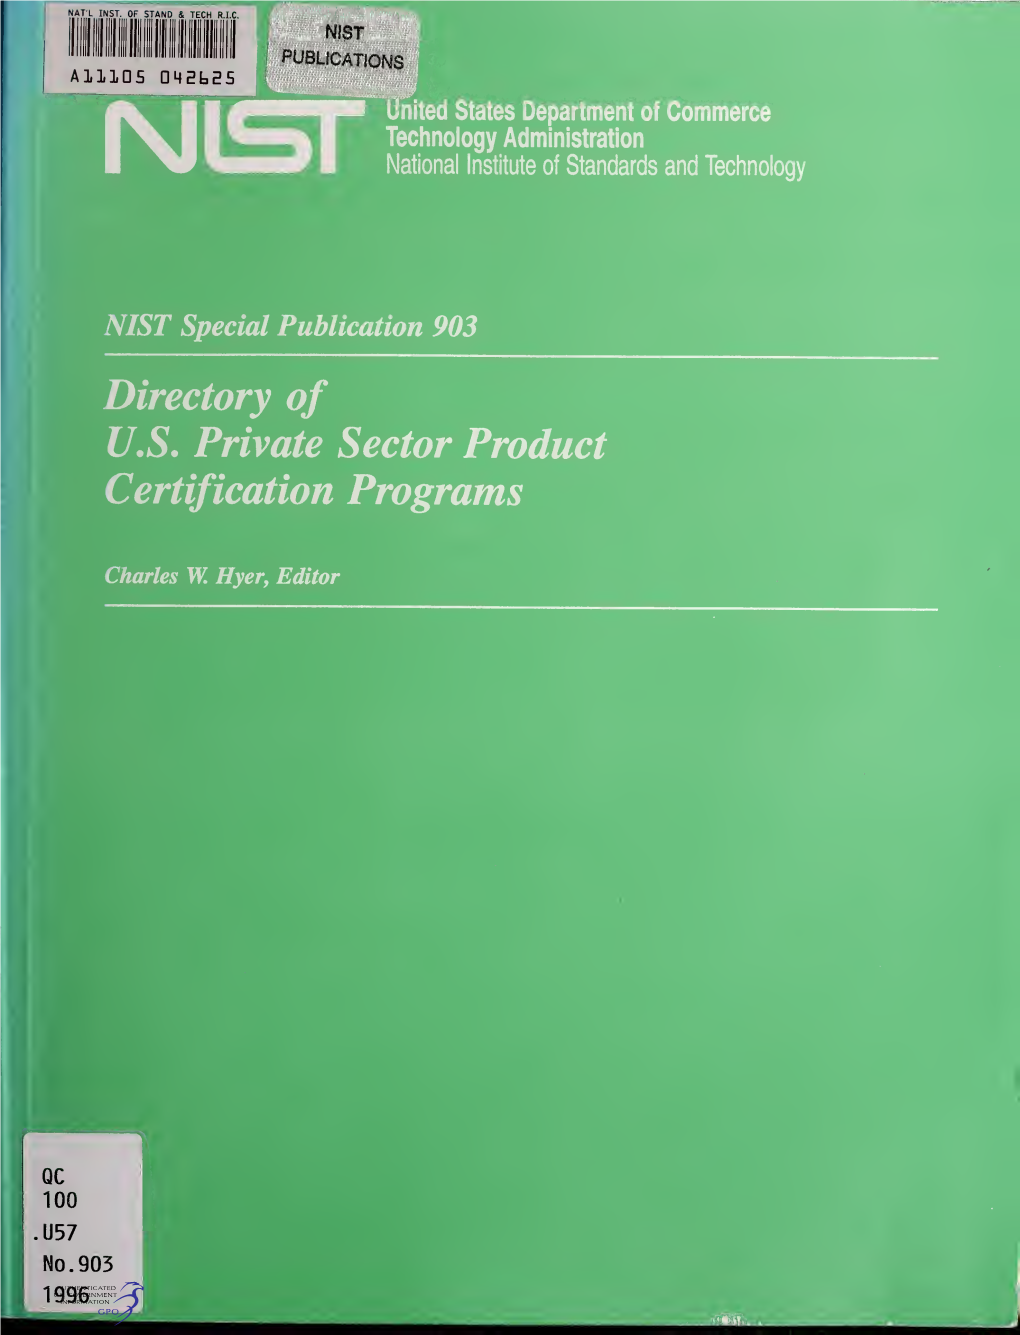 Directory of U.S. Private Sector Product Certification Programs